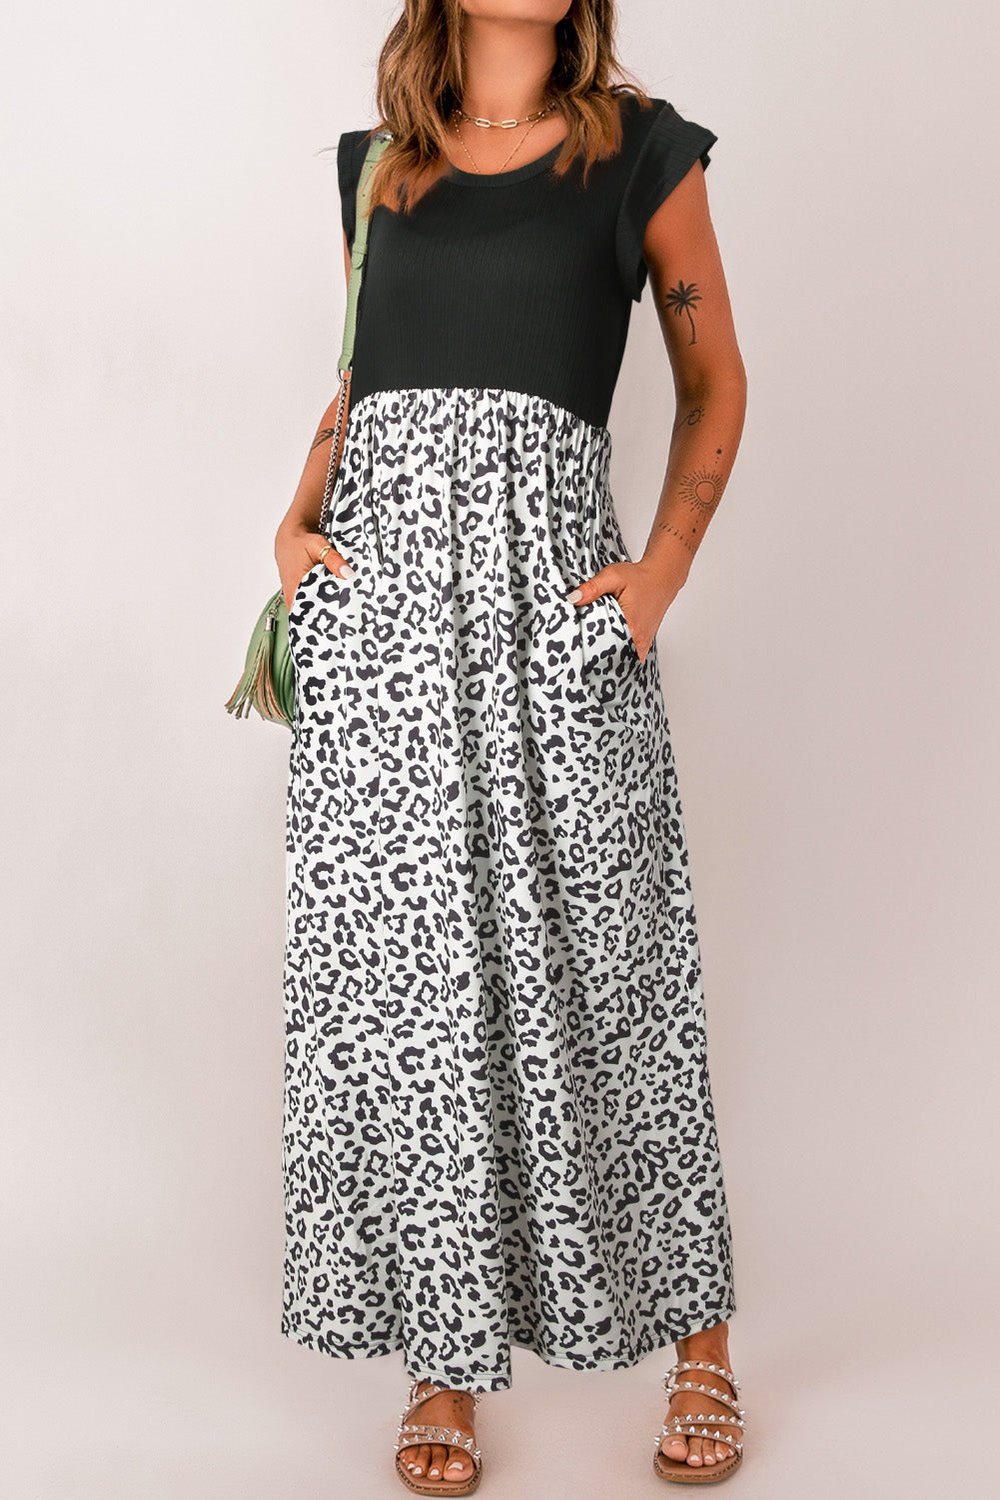 Leopard Print Round Neck Maxi Dress with Pockets - Casual & Maxi Dresses - FITGGINS